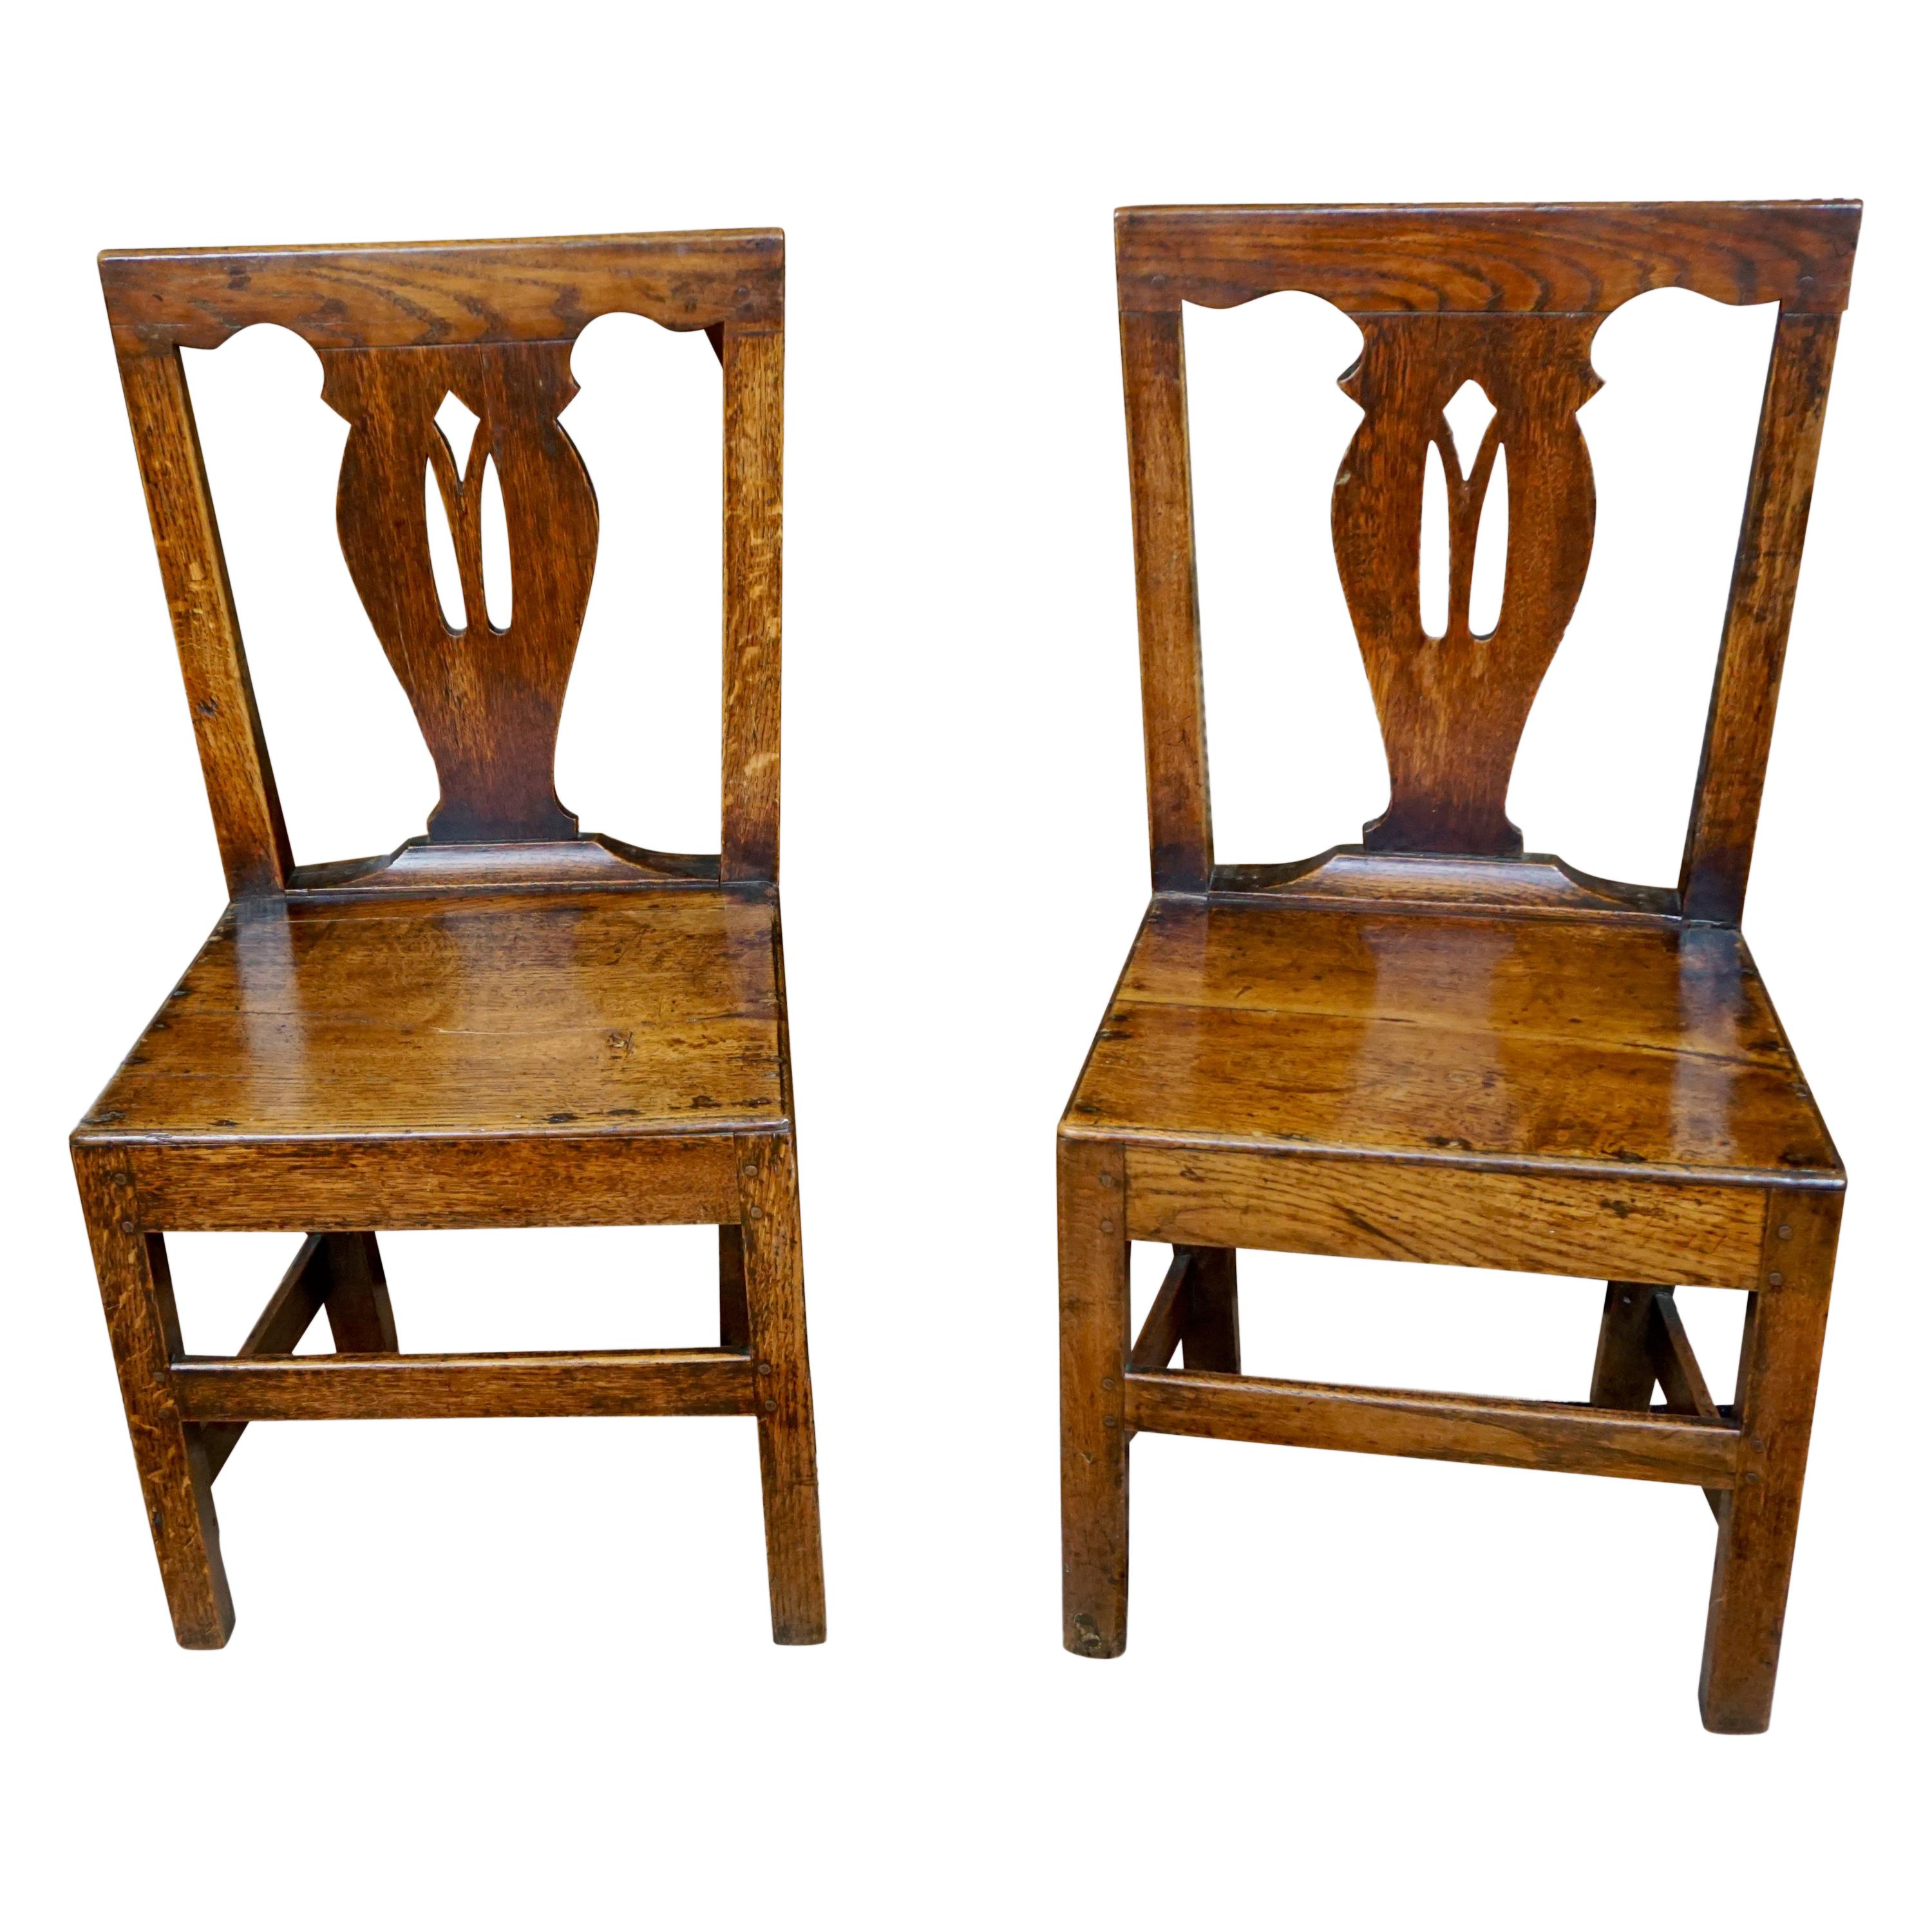 Pair of English Provincial Mid-Georgian Period Oak Side Chairs